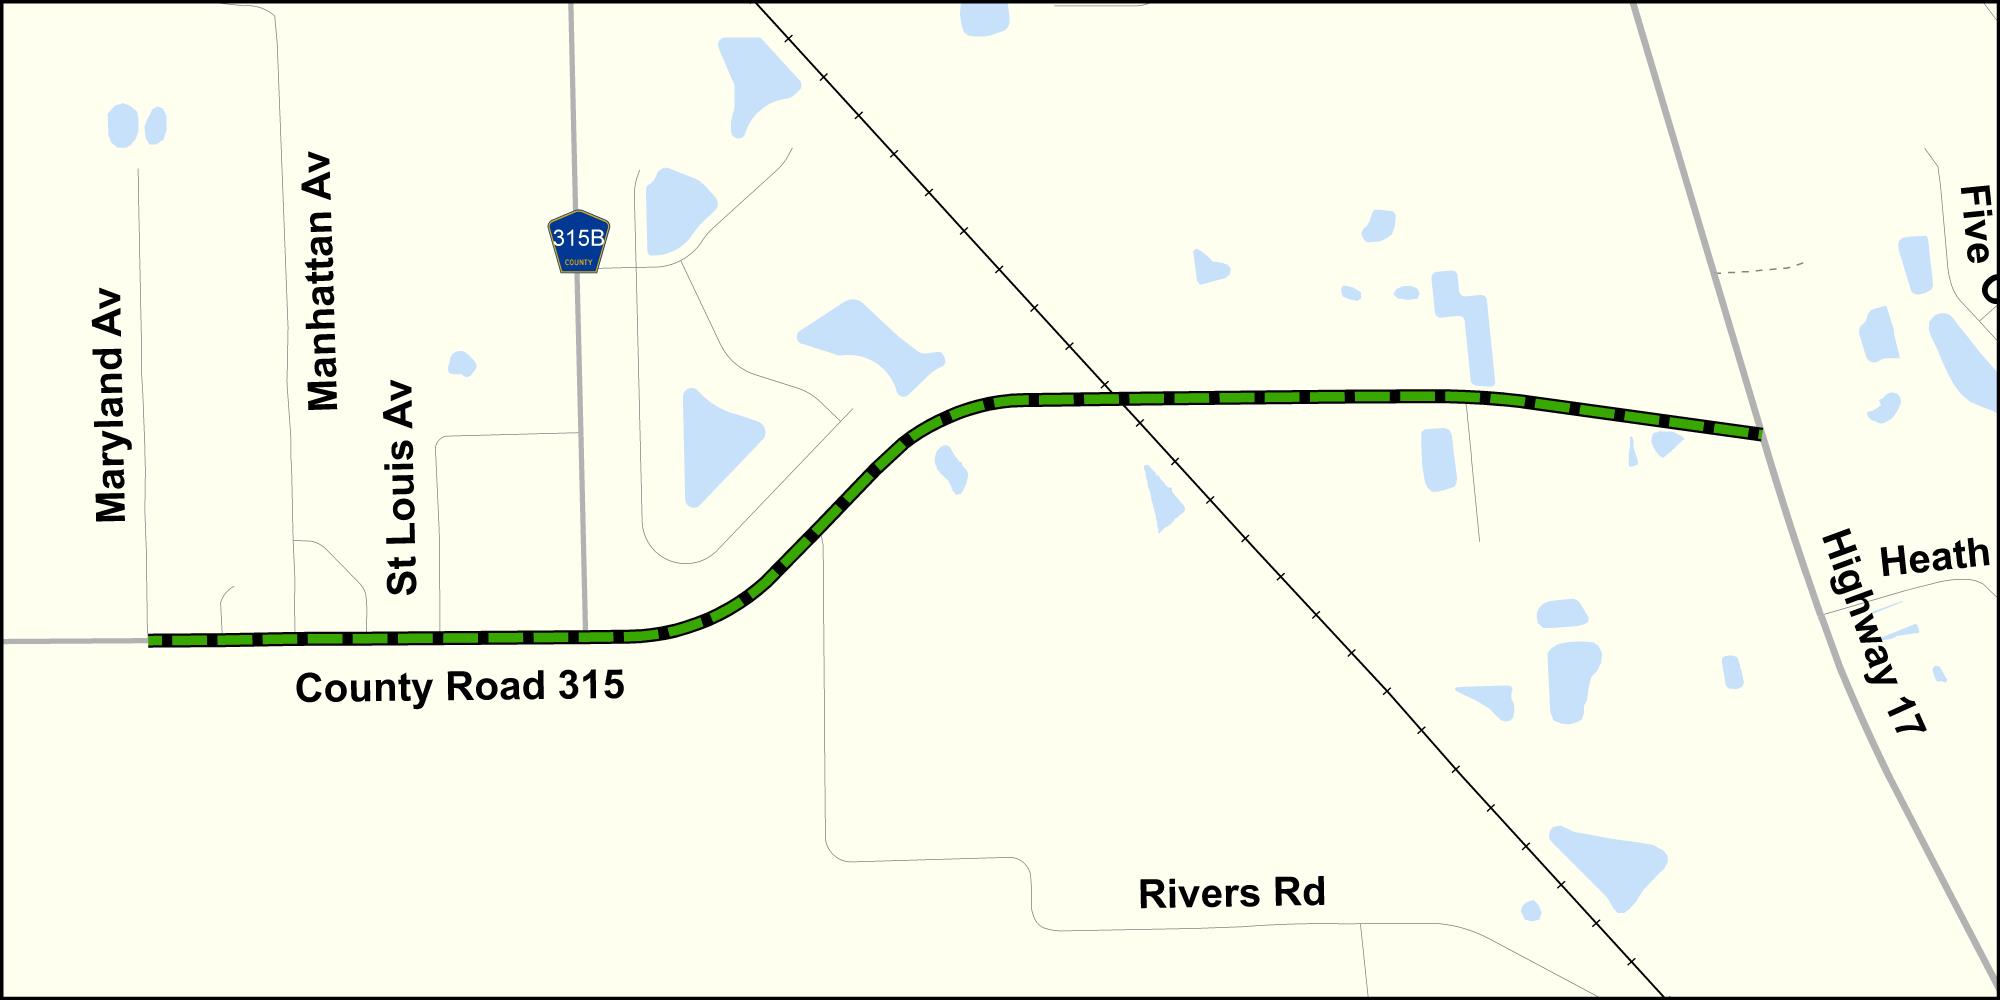 Project #6A- First Coast Connector from US 17 to CR 315